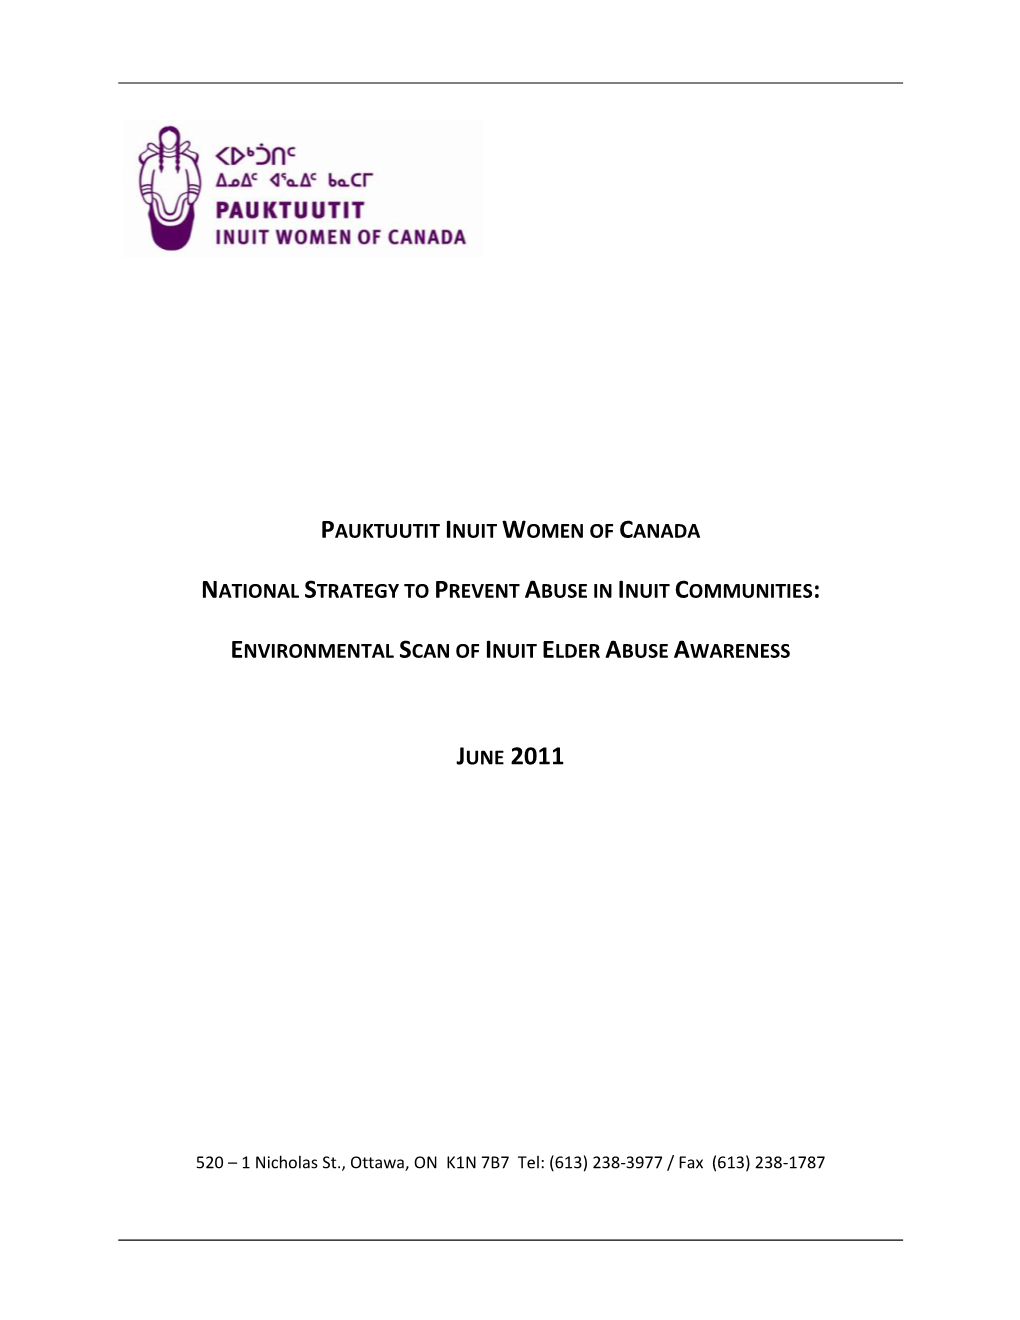 Pauktuutit Inuit Women of Canada National Strategy to Prevent Abuse in Inuit Communities: Environmental Scan of Inuit Elder Abus